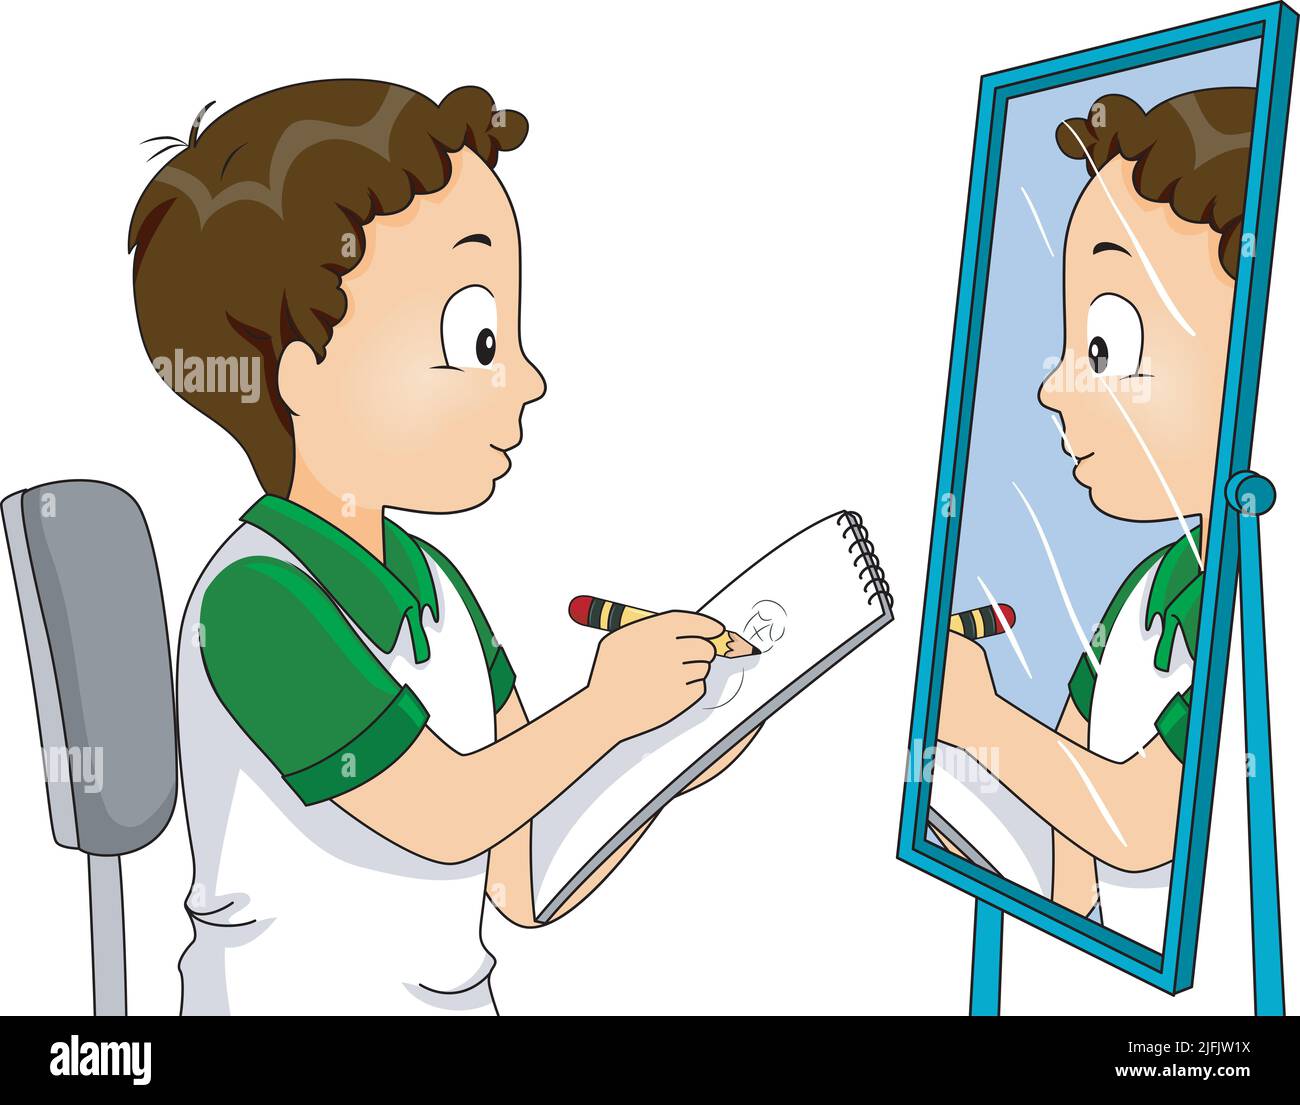 Illustration of Kid Boy Sitting in a Chair Facing a Mirror and Drawing Self Reflection in a Sketch Pad Using Pencil Stock Photo